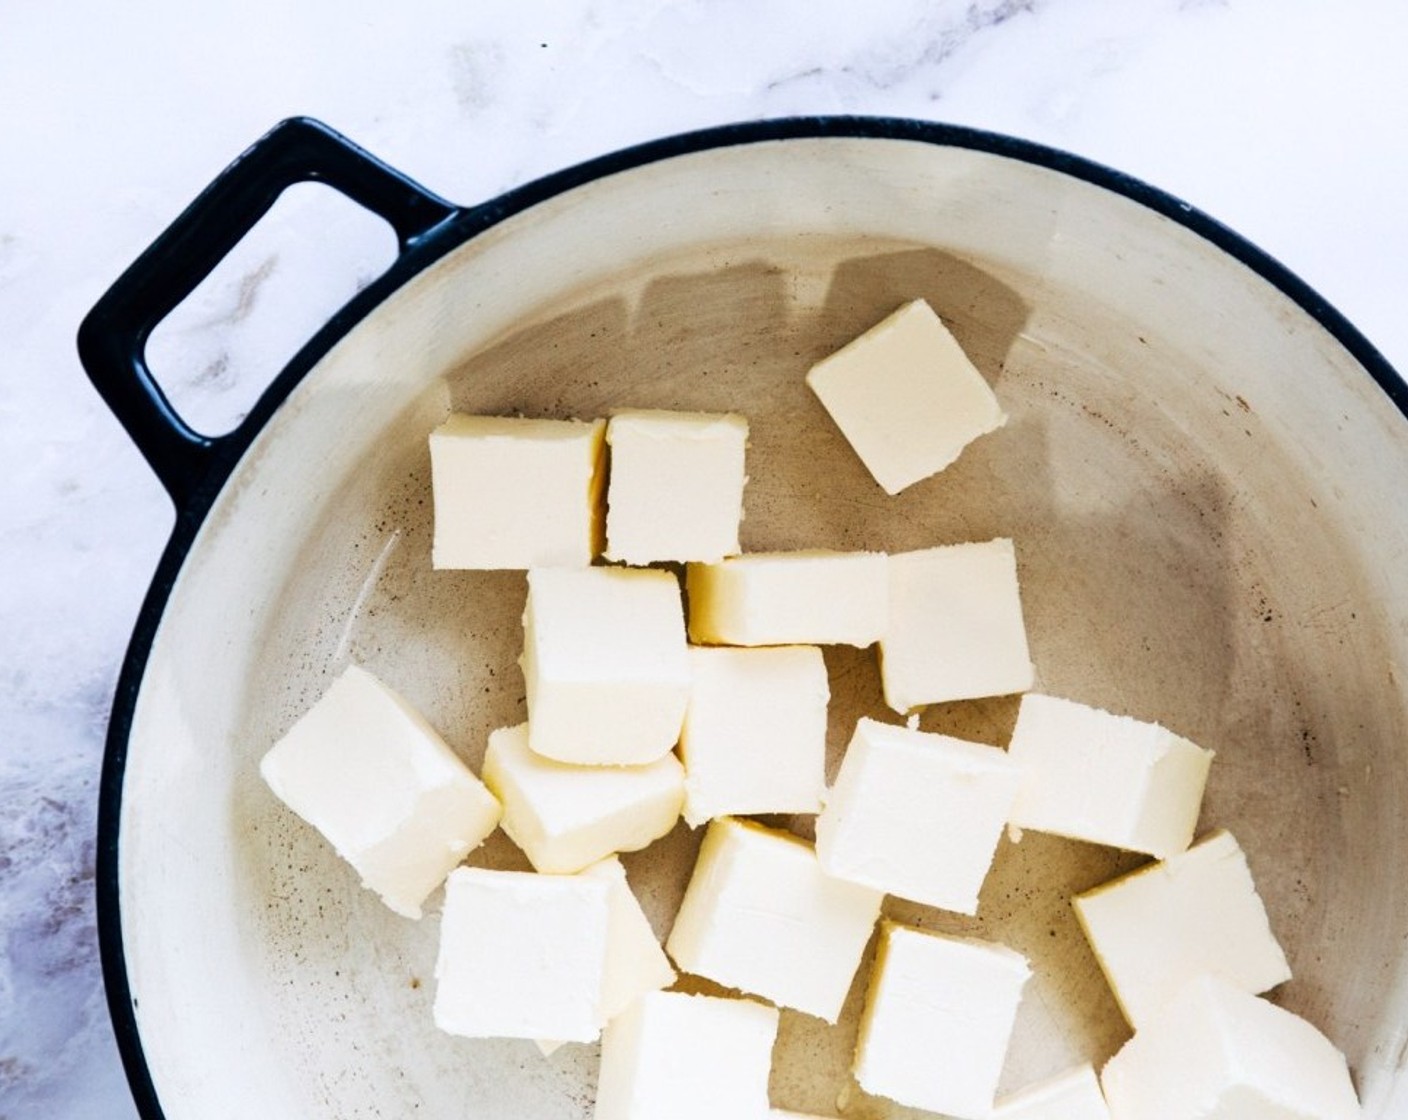 step 1 Start by melting your Unsalted Butter (1 cup) over medium heat. Use a pan with a light-colored bottom so you can keep track of the color while the butter starts to brown.